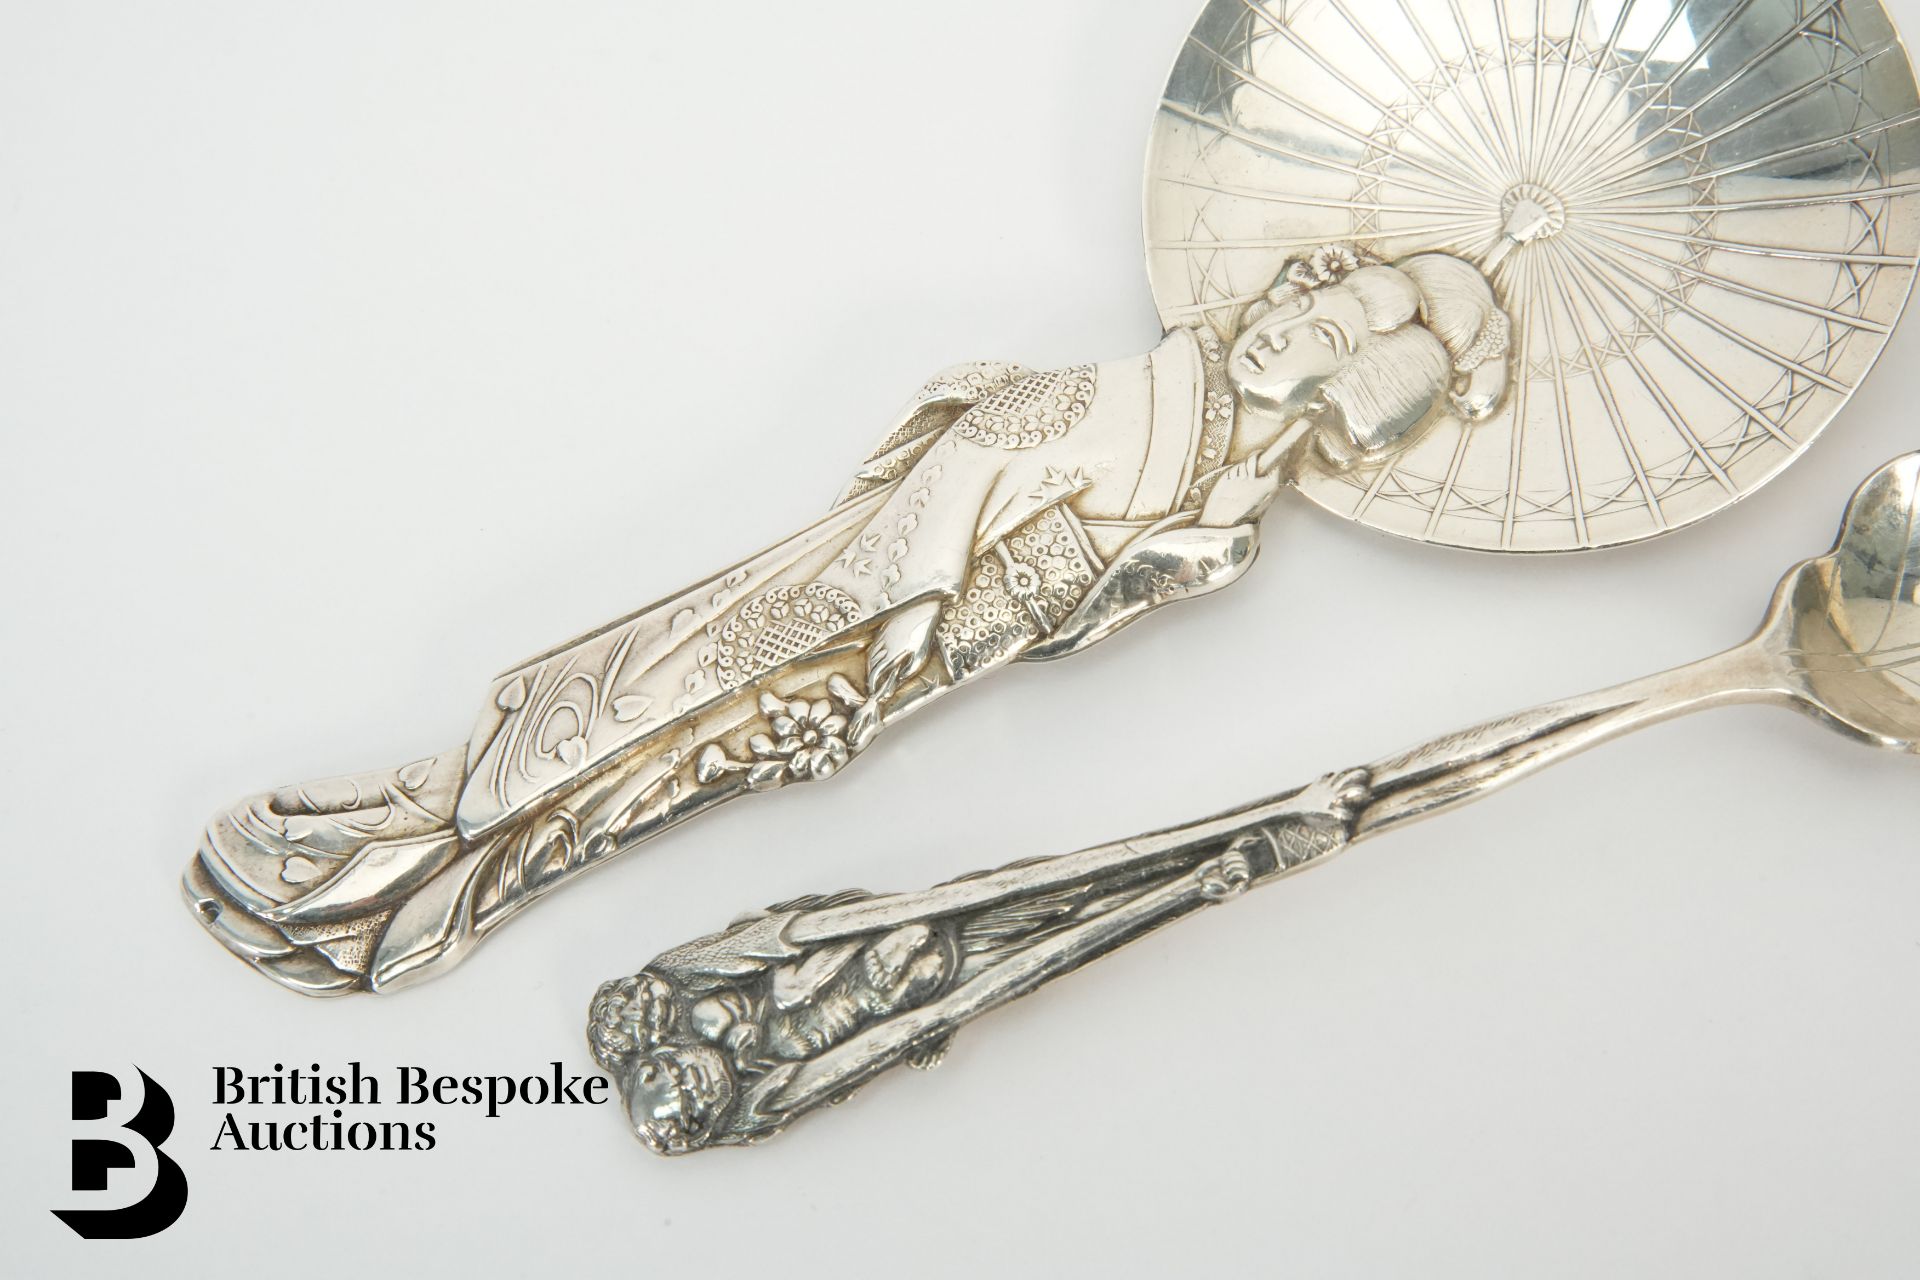 Japanese Silver Spoons - Image 2 of 3